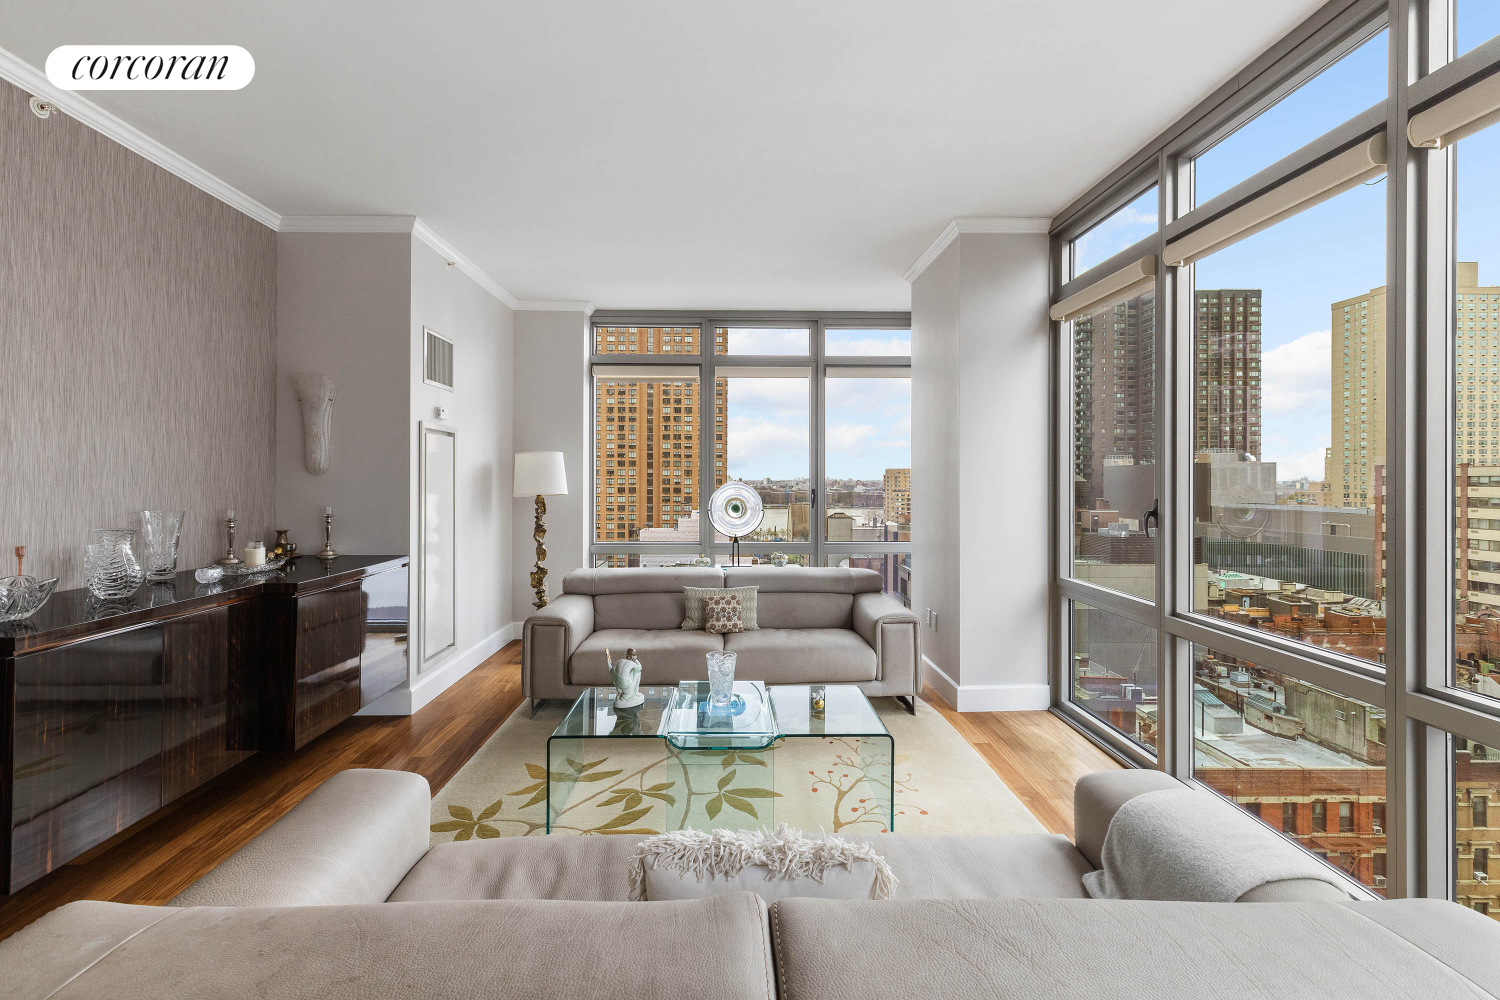 333 East 91st Street 12Cd, Yorkville, Upper East Side, NYC - 4 Bedrooms  
4.5 Bathrooms  
9 Rooms - 